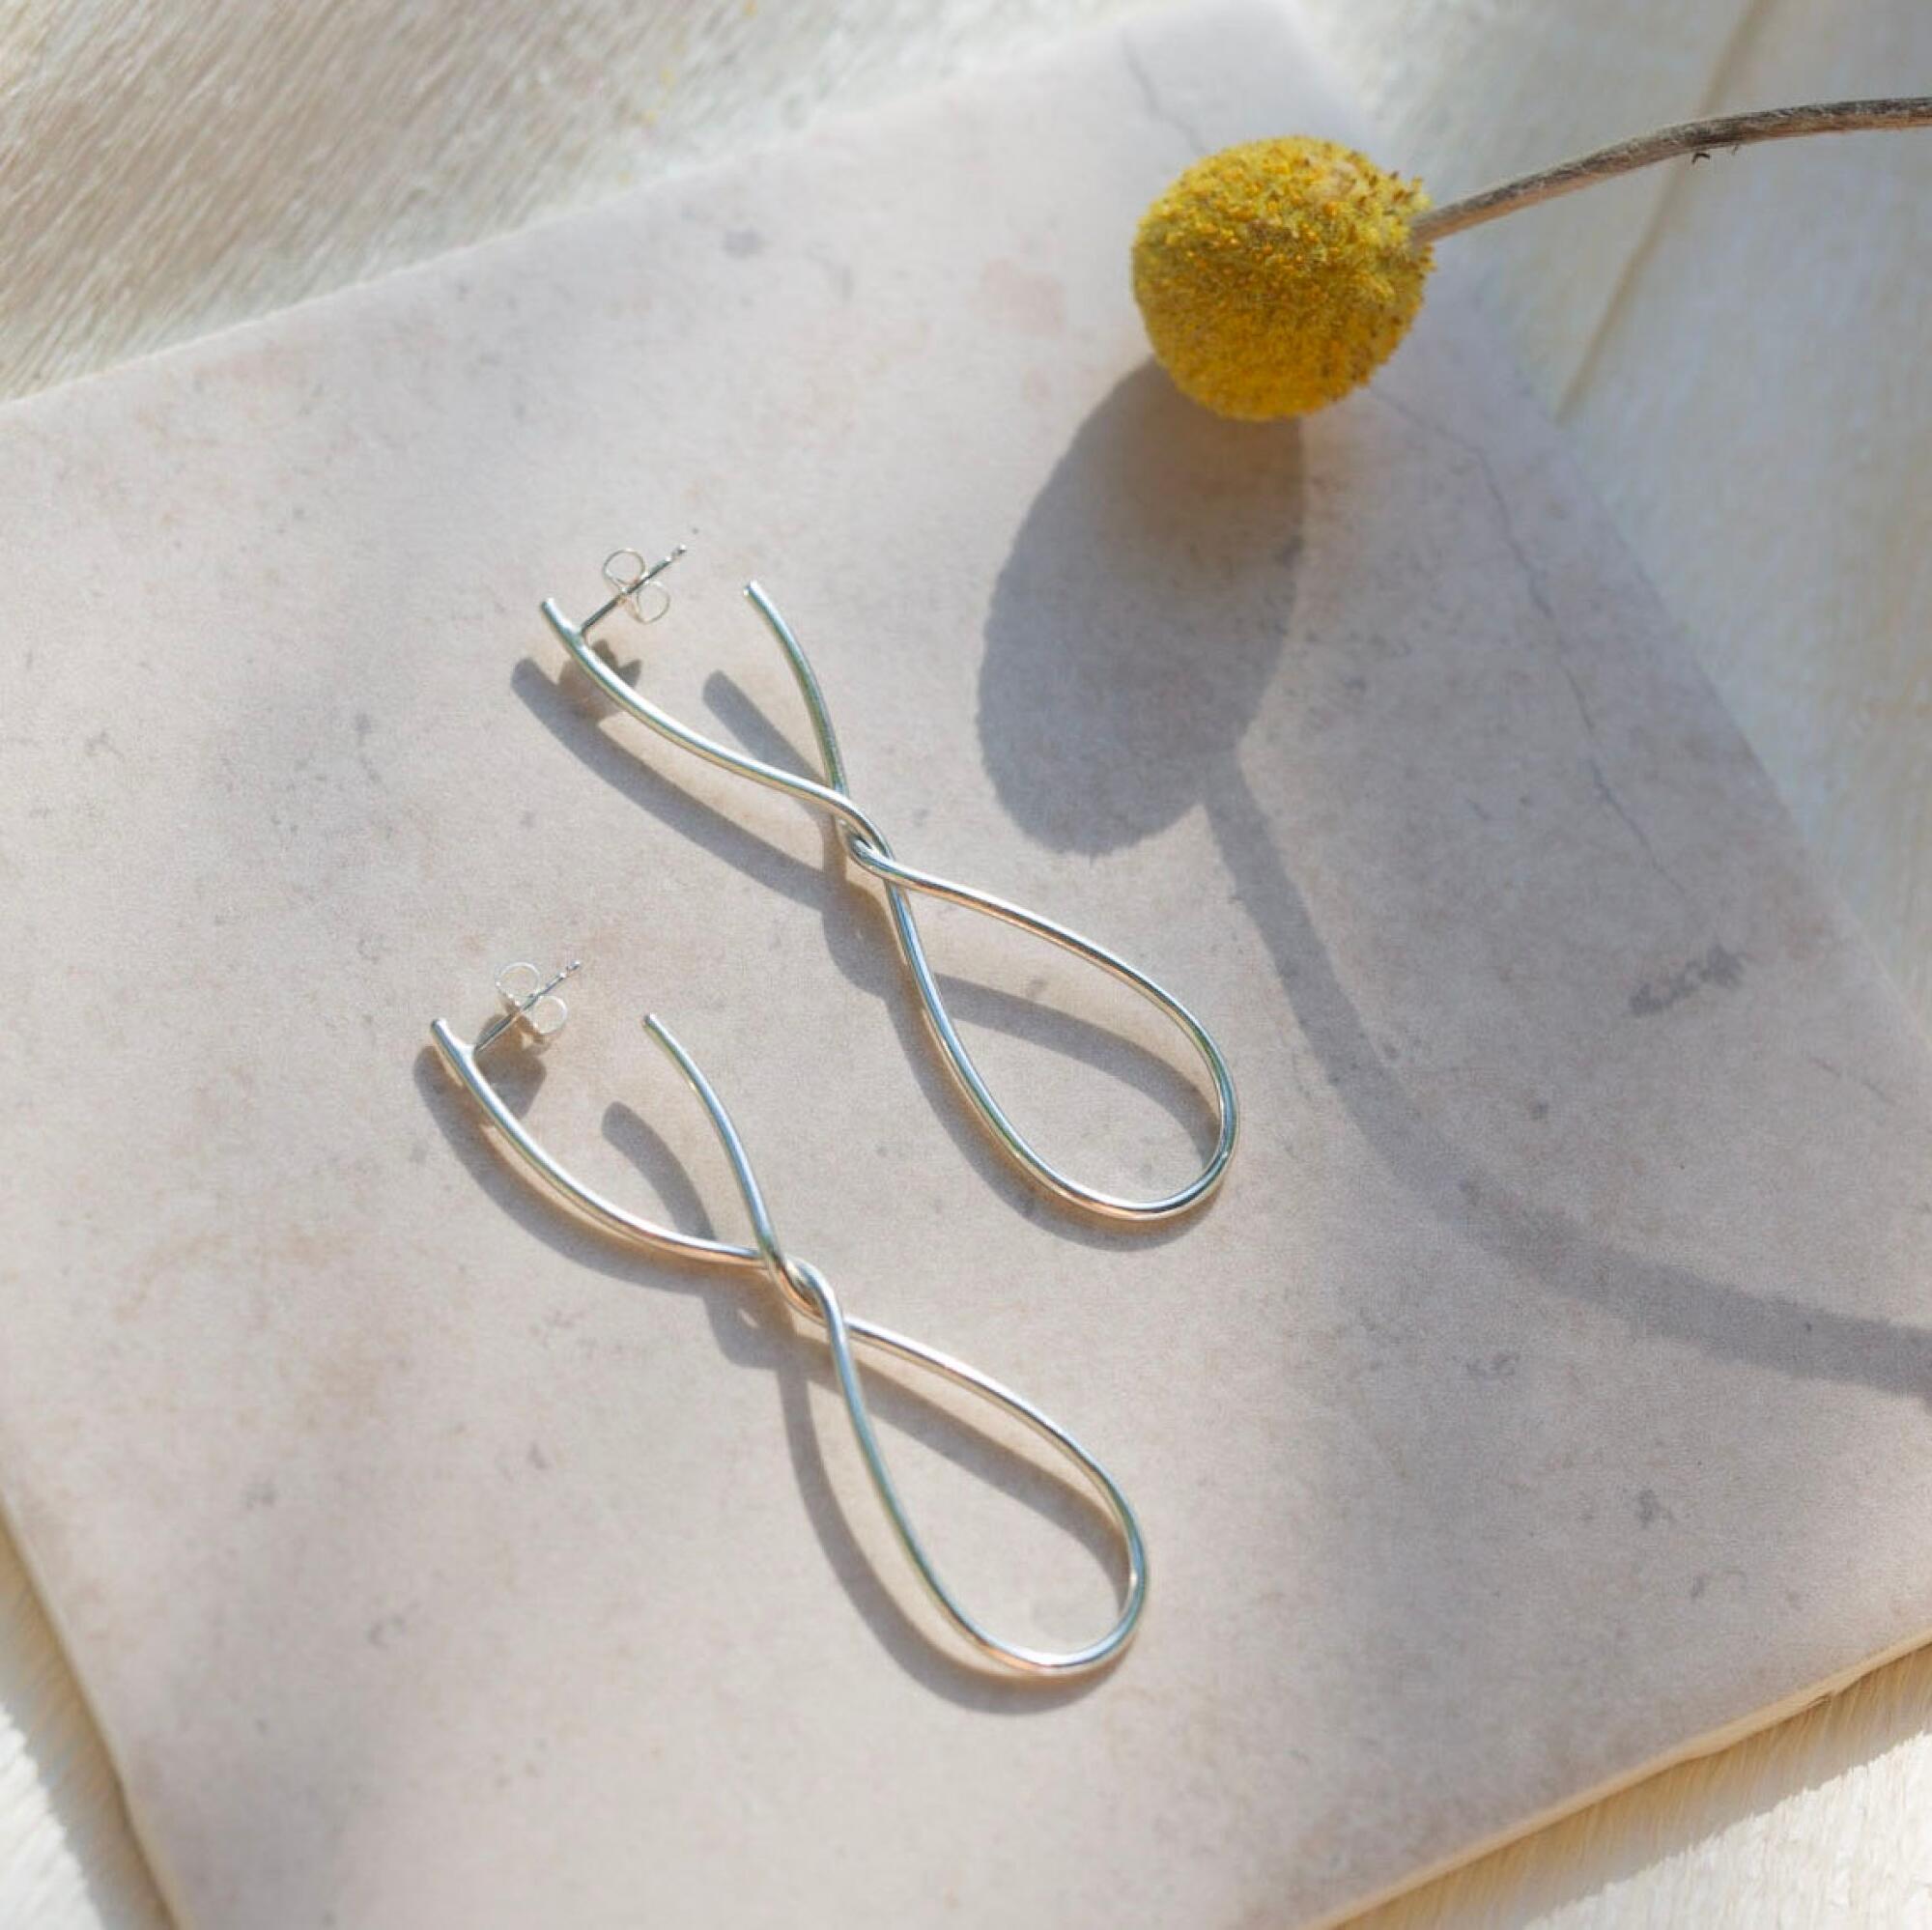 Laura Estrada Bruna petit earrings, $130 Handcrafted in L.A., these elegant earrings are like a sterling silver dance.